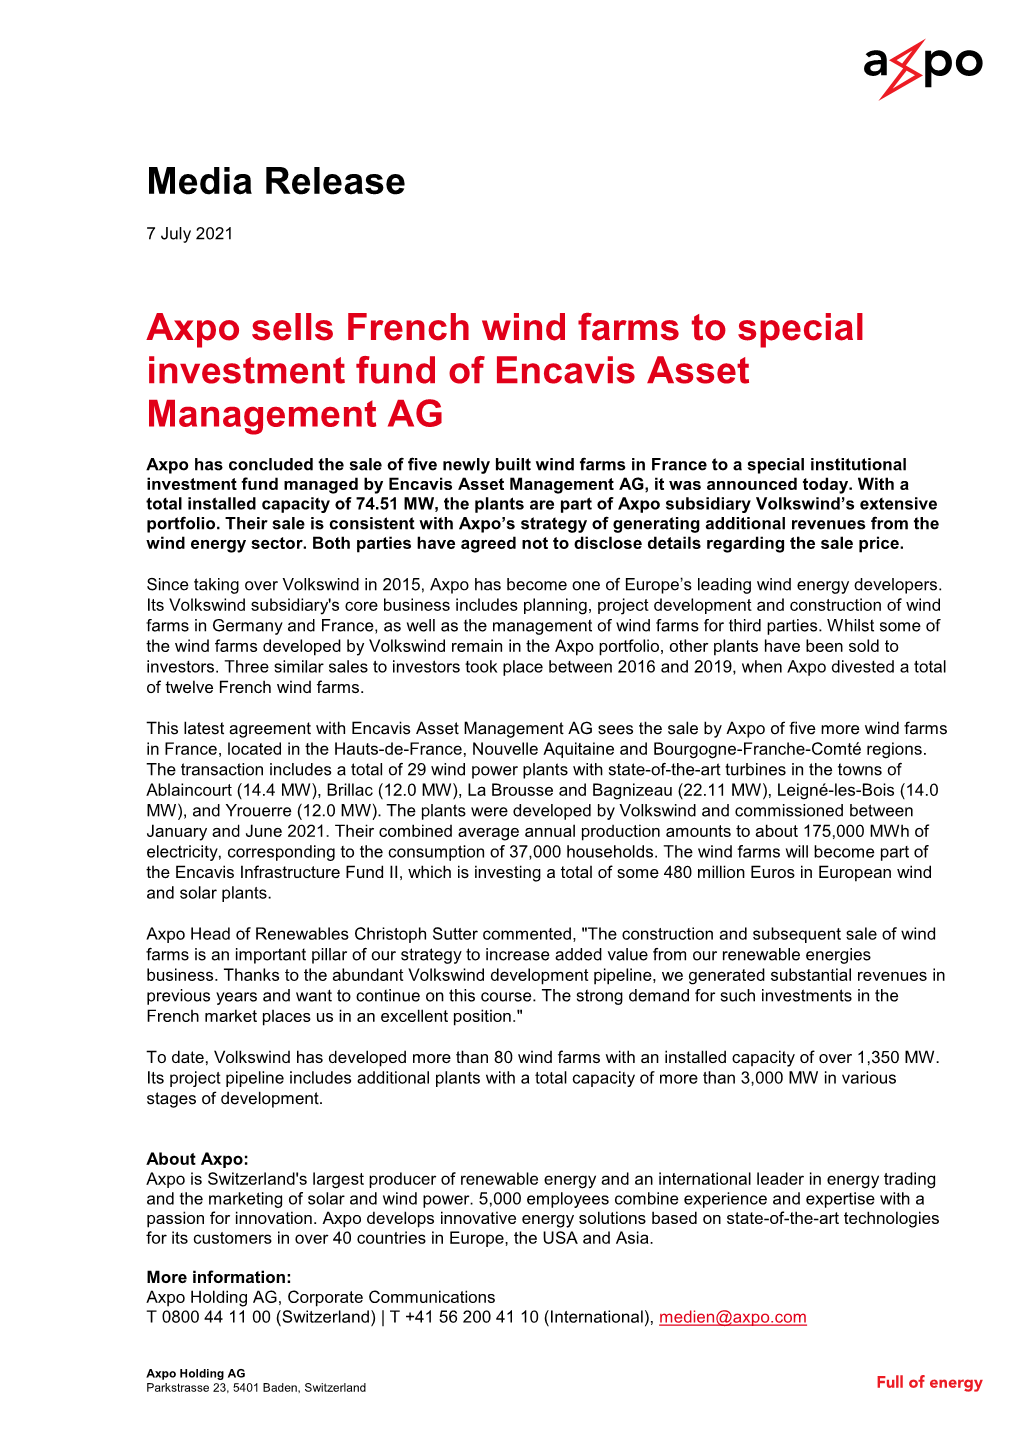 Media Release Axpo Sells French Wind Farms to Special Investment